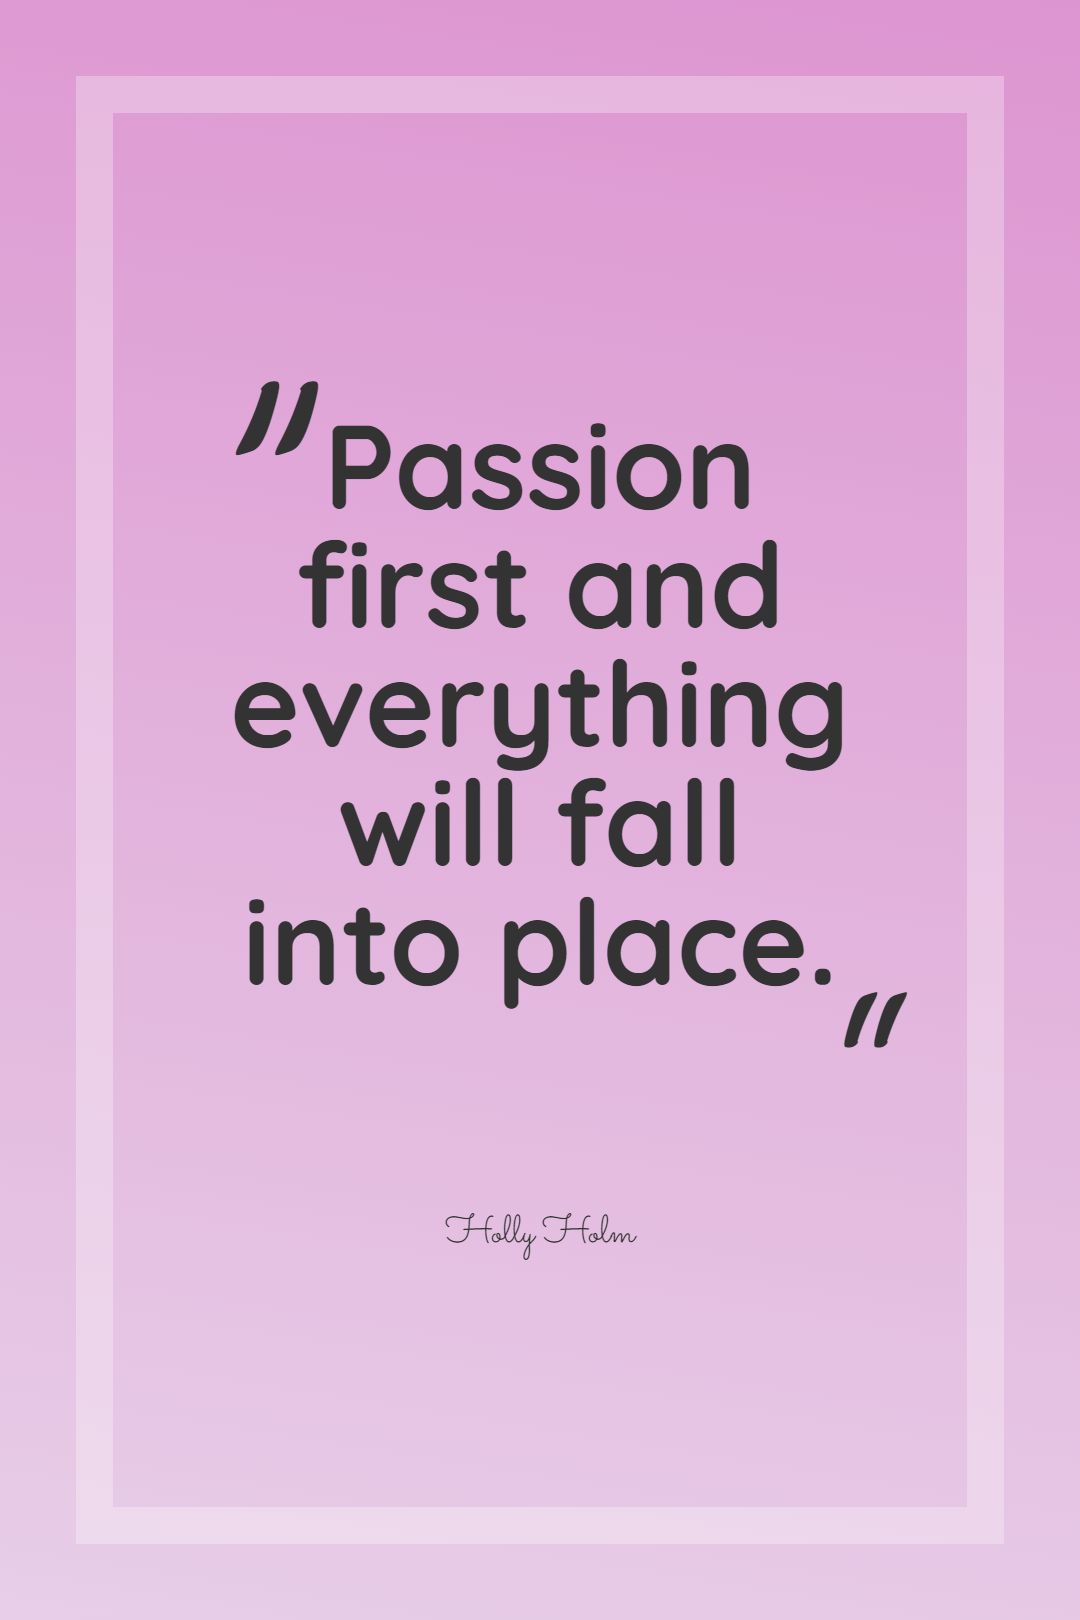 Passion first and everything will fall into place.